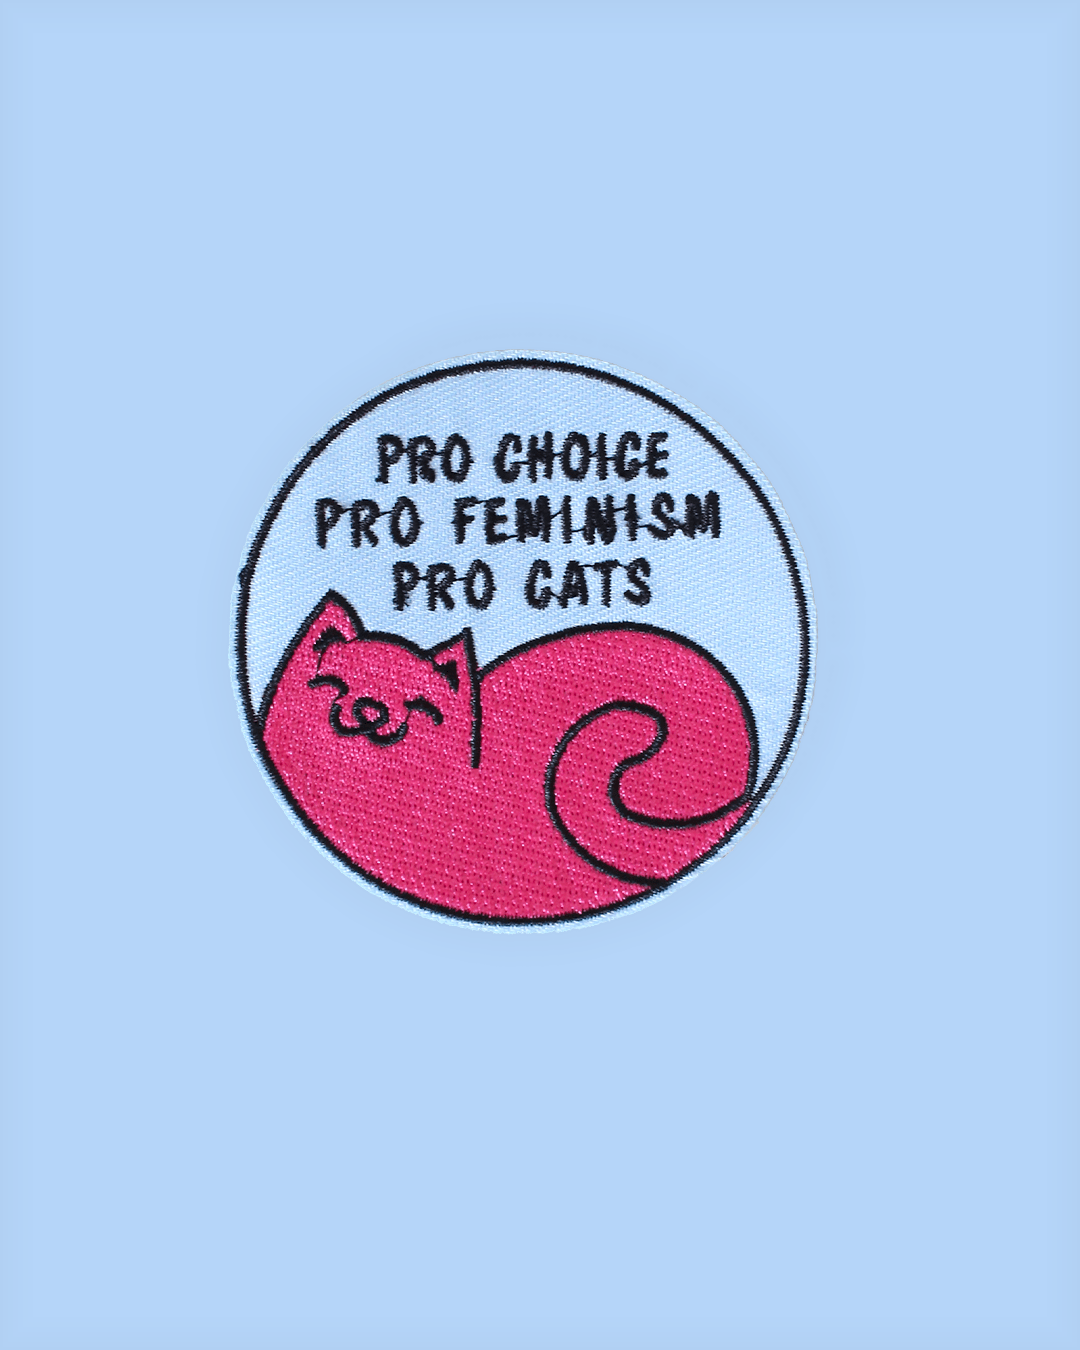 Pro Choice, Pro Feminism, Pro Cats Patch - Reproductive Rights Feminist Embroidered Iron On Clothes Patch - Reproductive Rights Patch